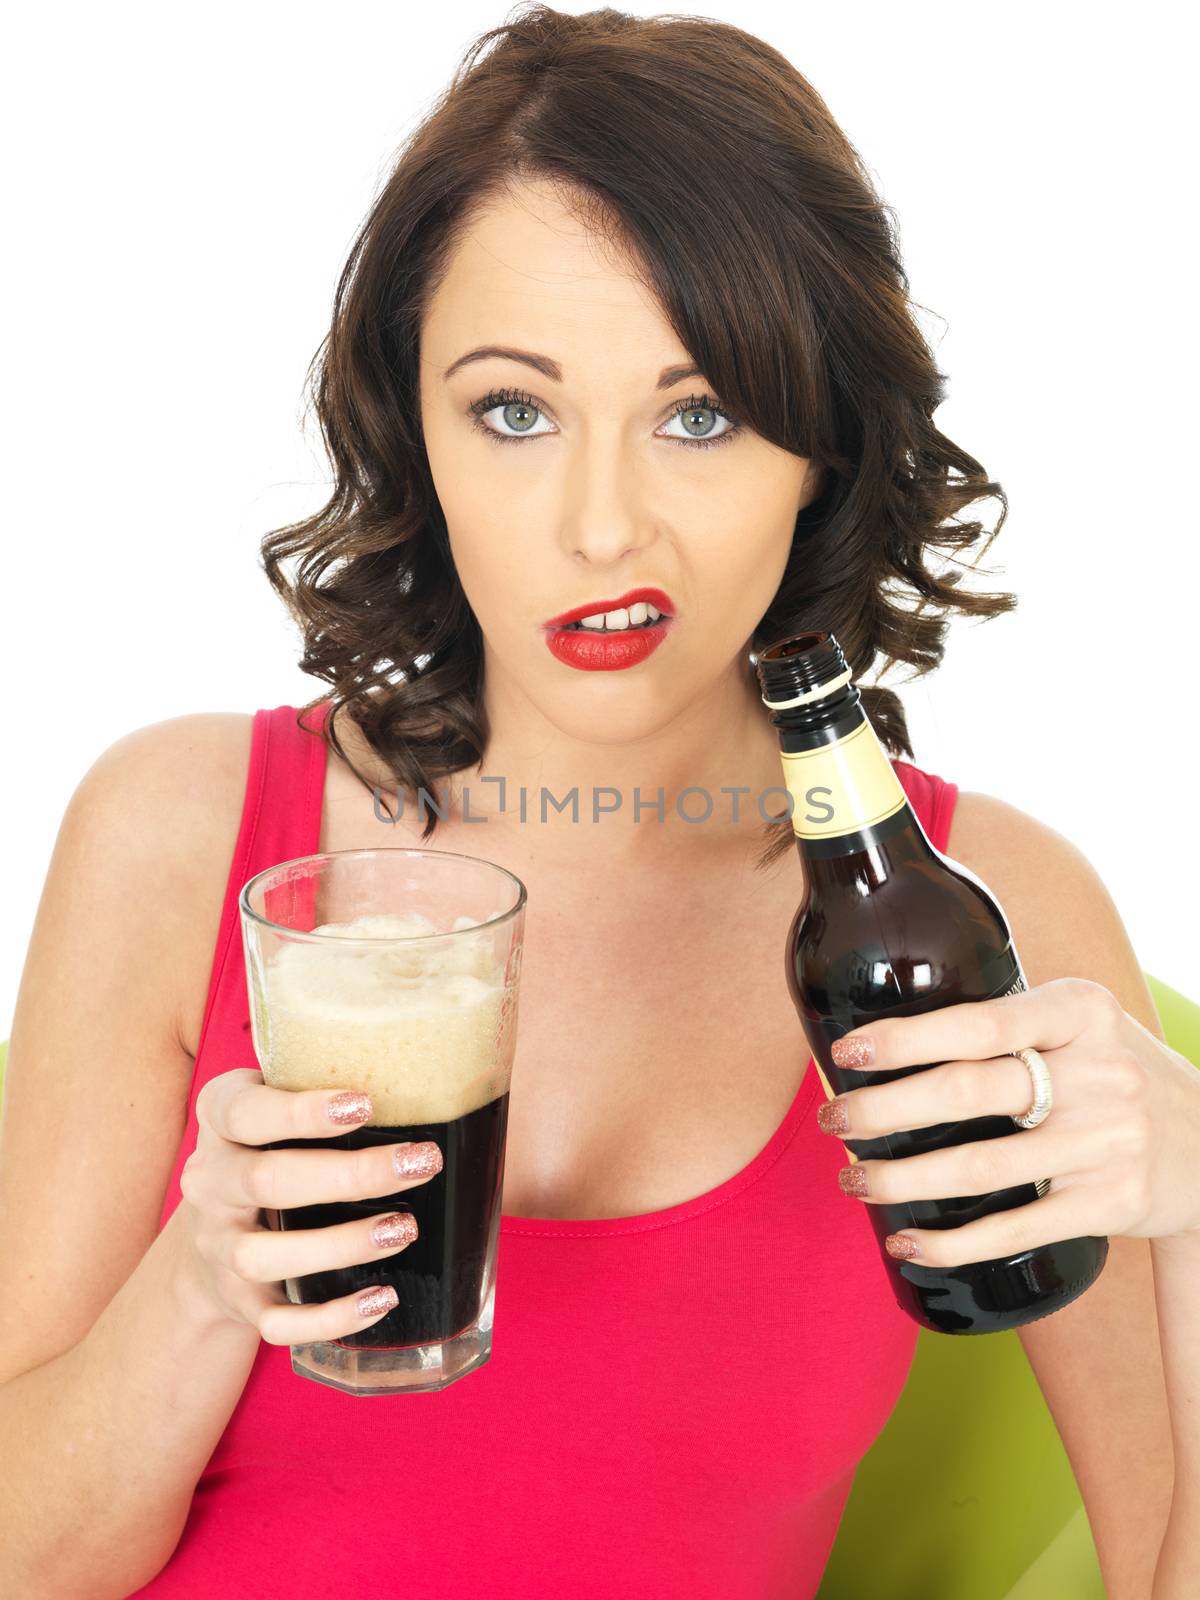 Attractive Young Woman Drinking Beer by Whiteboxmedia